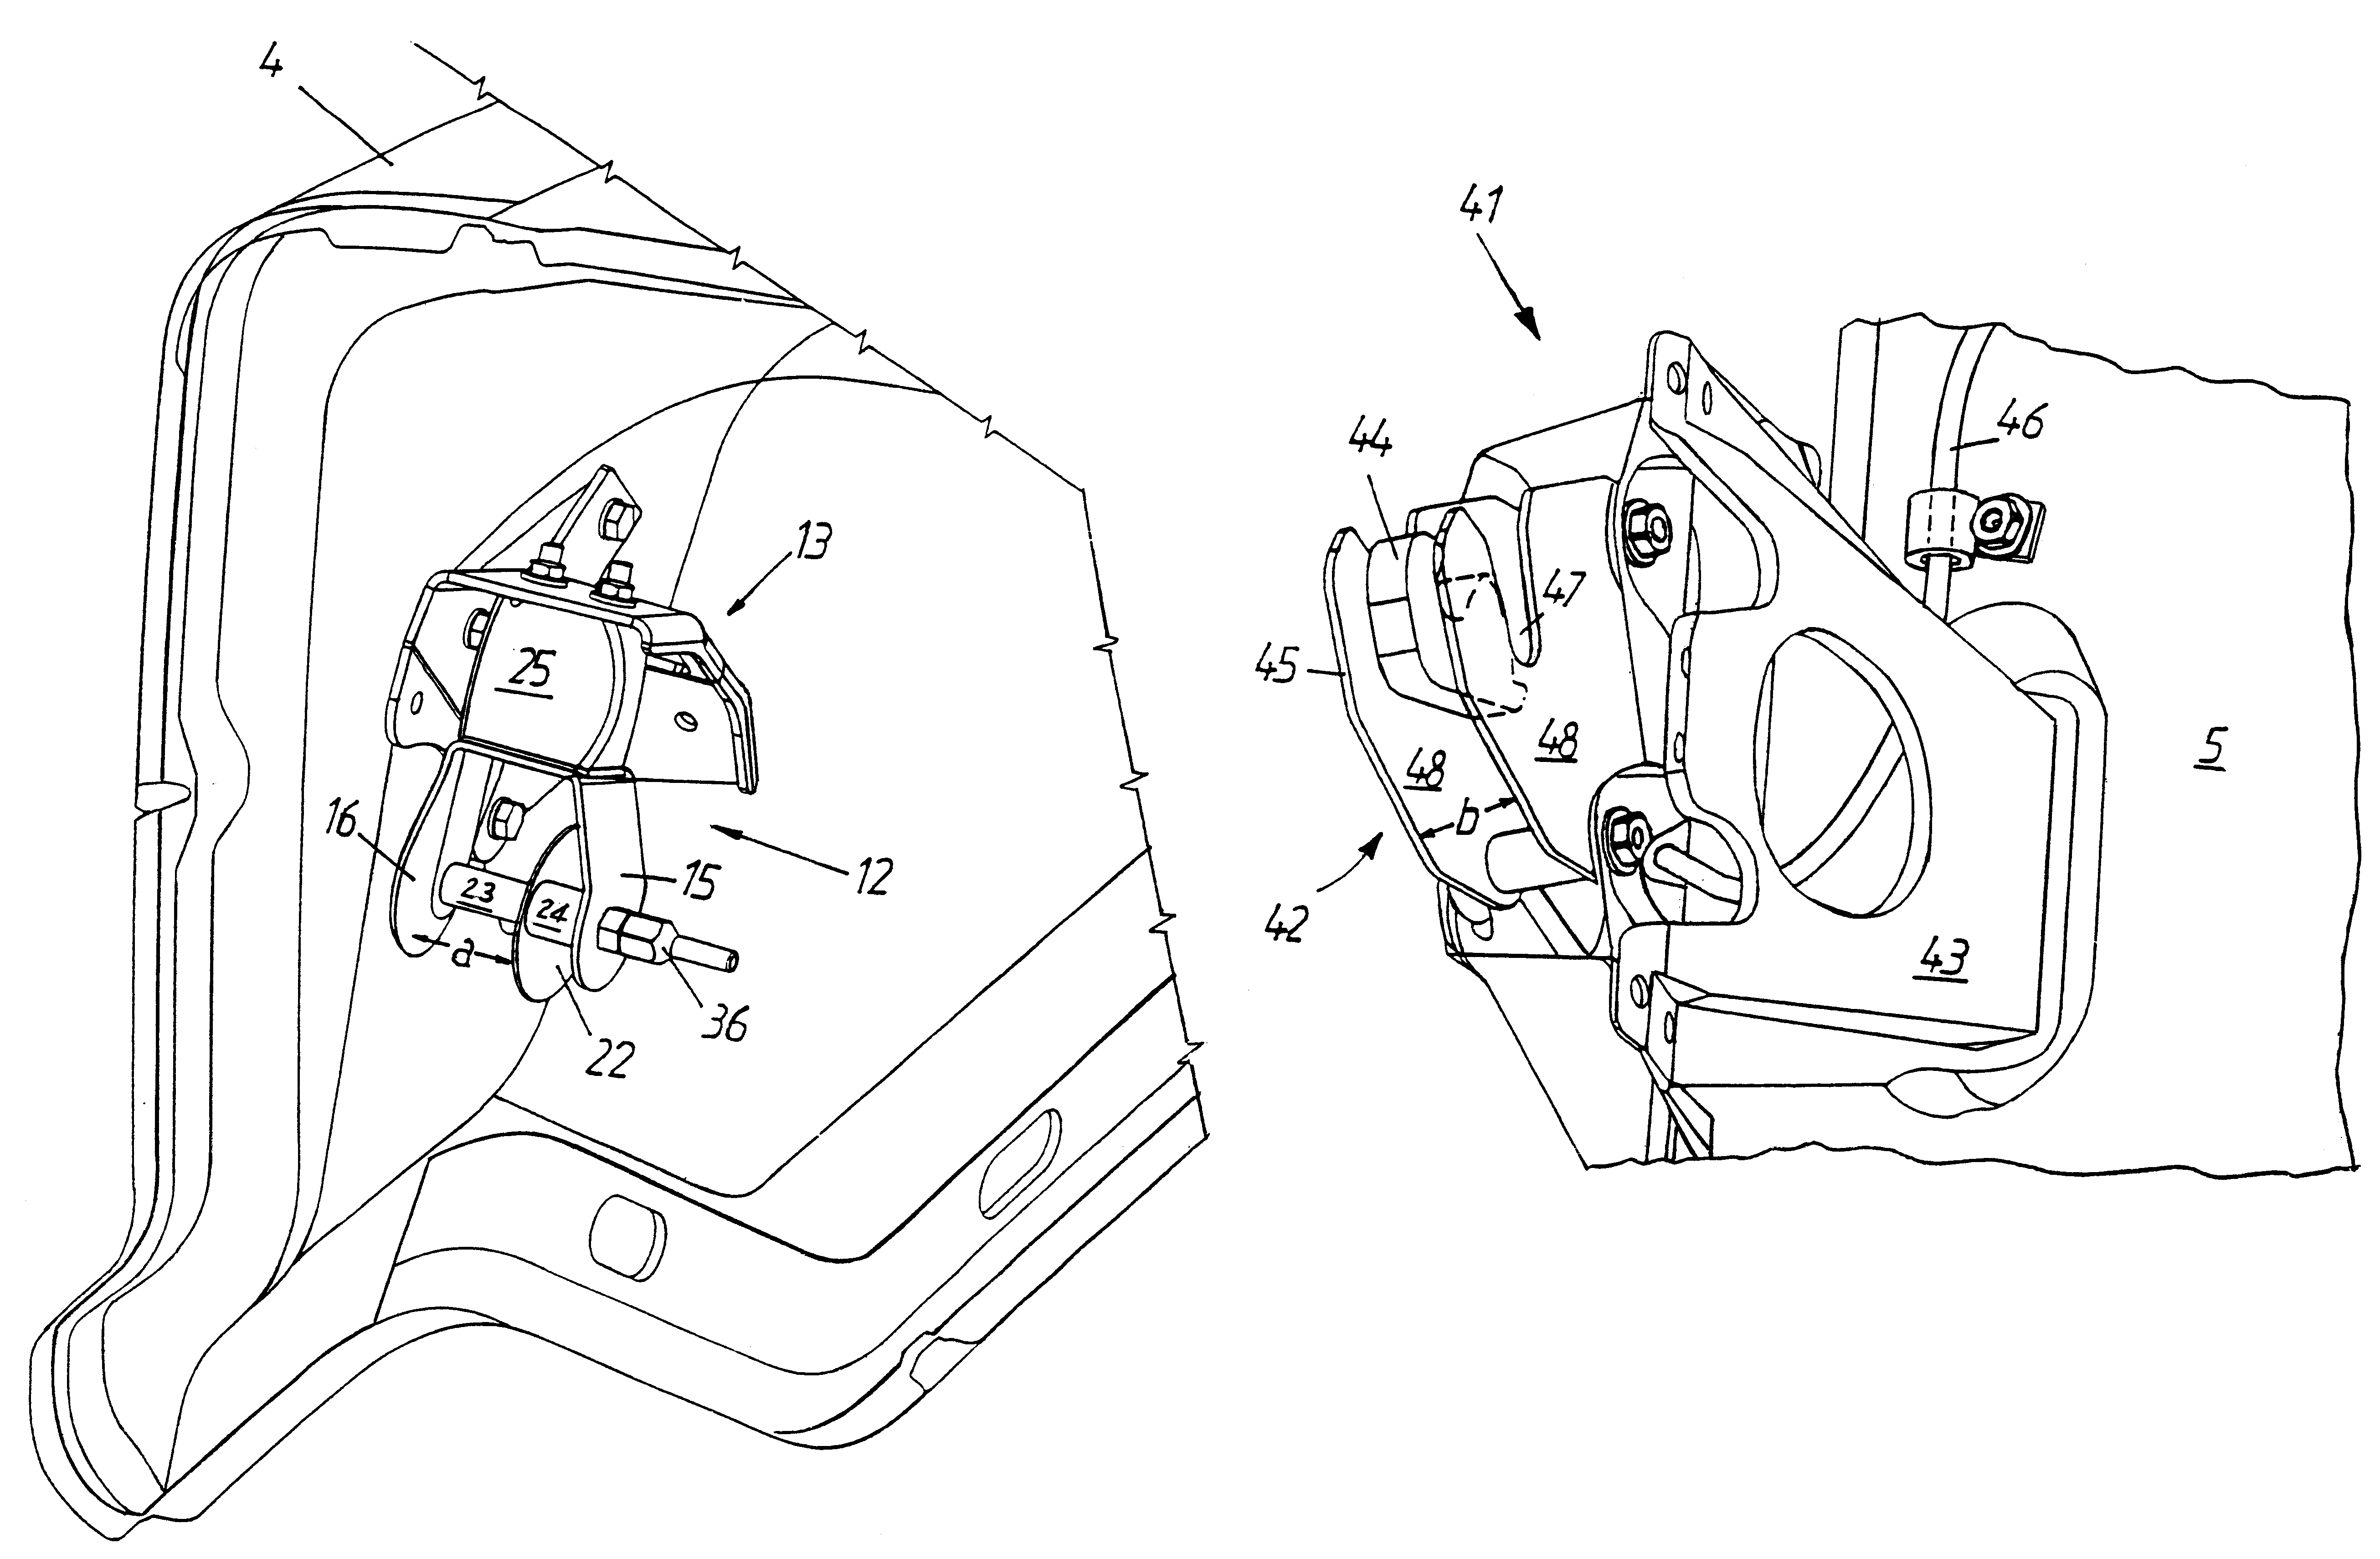 Arrangement for firmly locking an engine bonnet to a vehicle cab